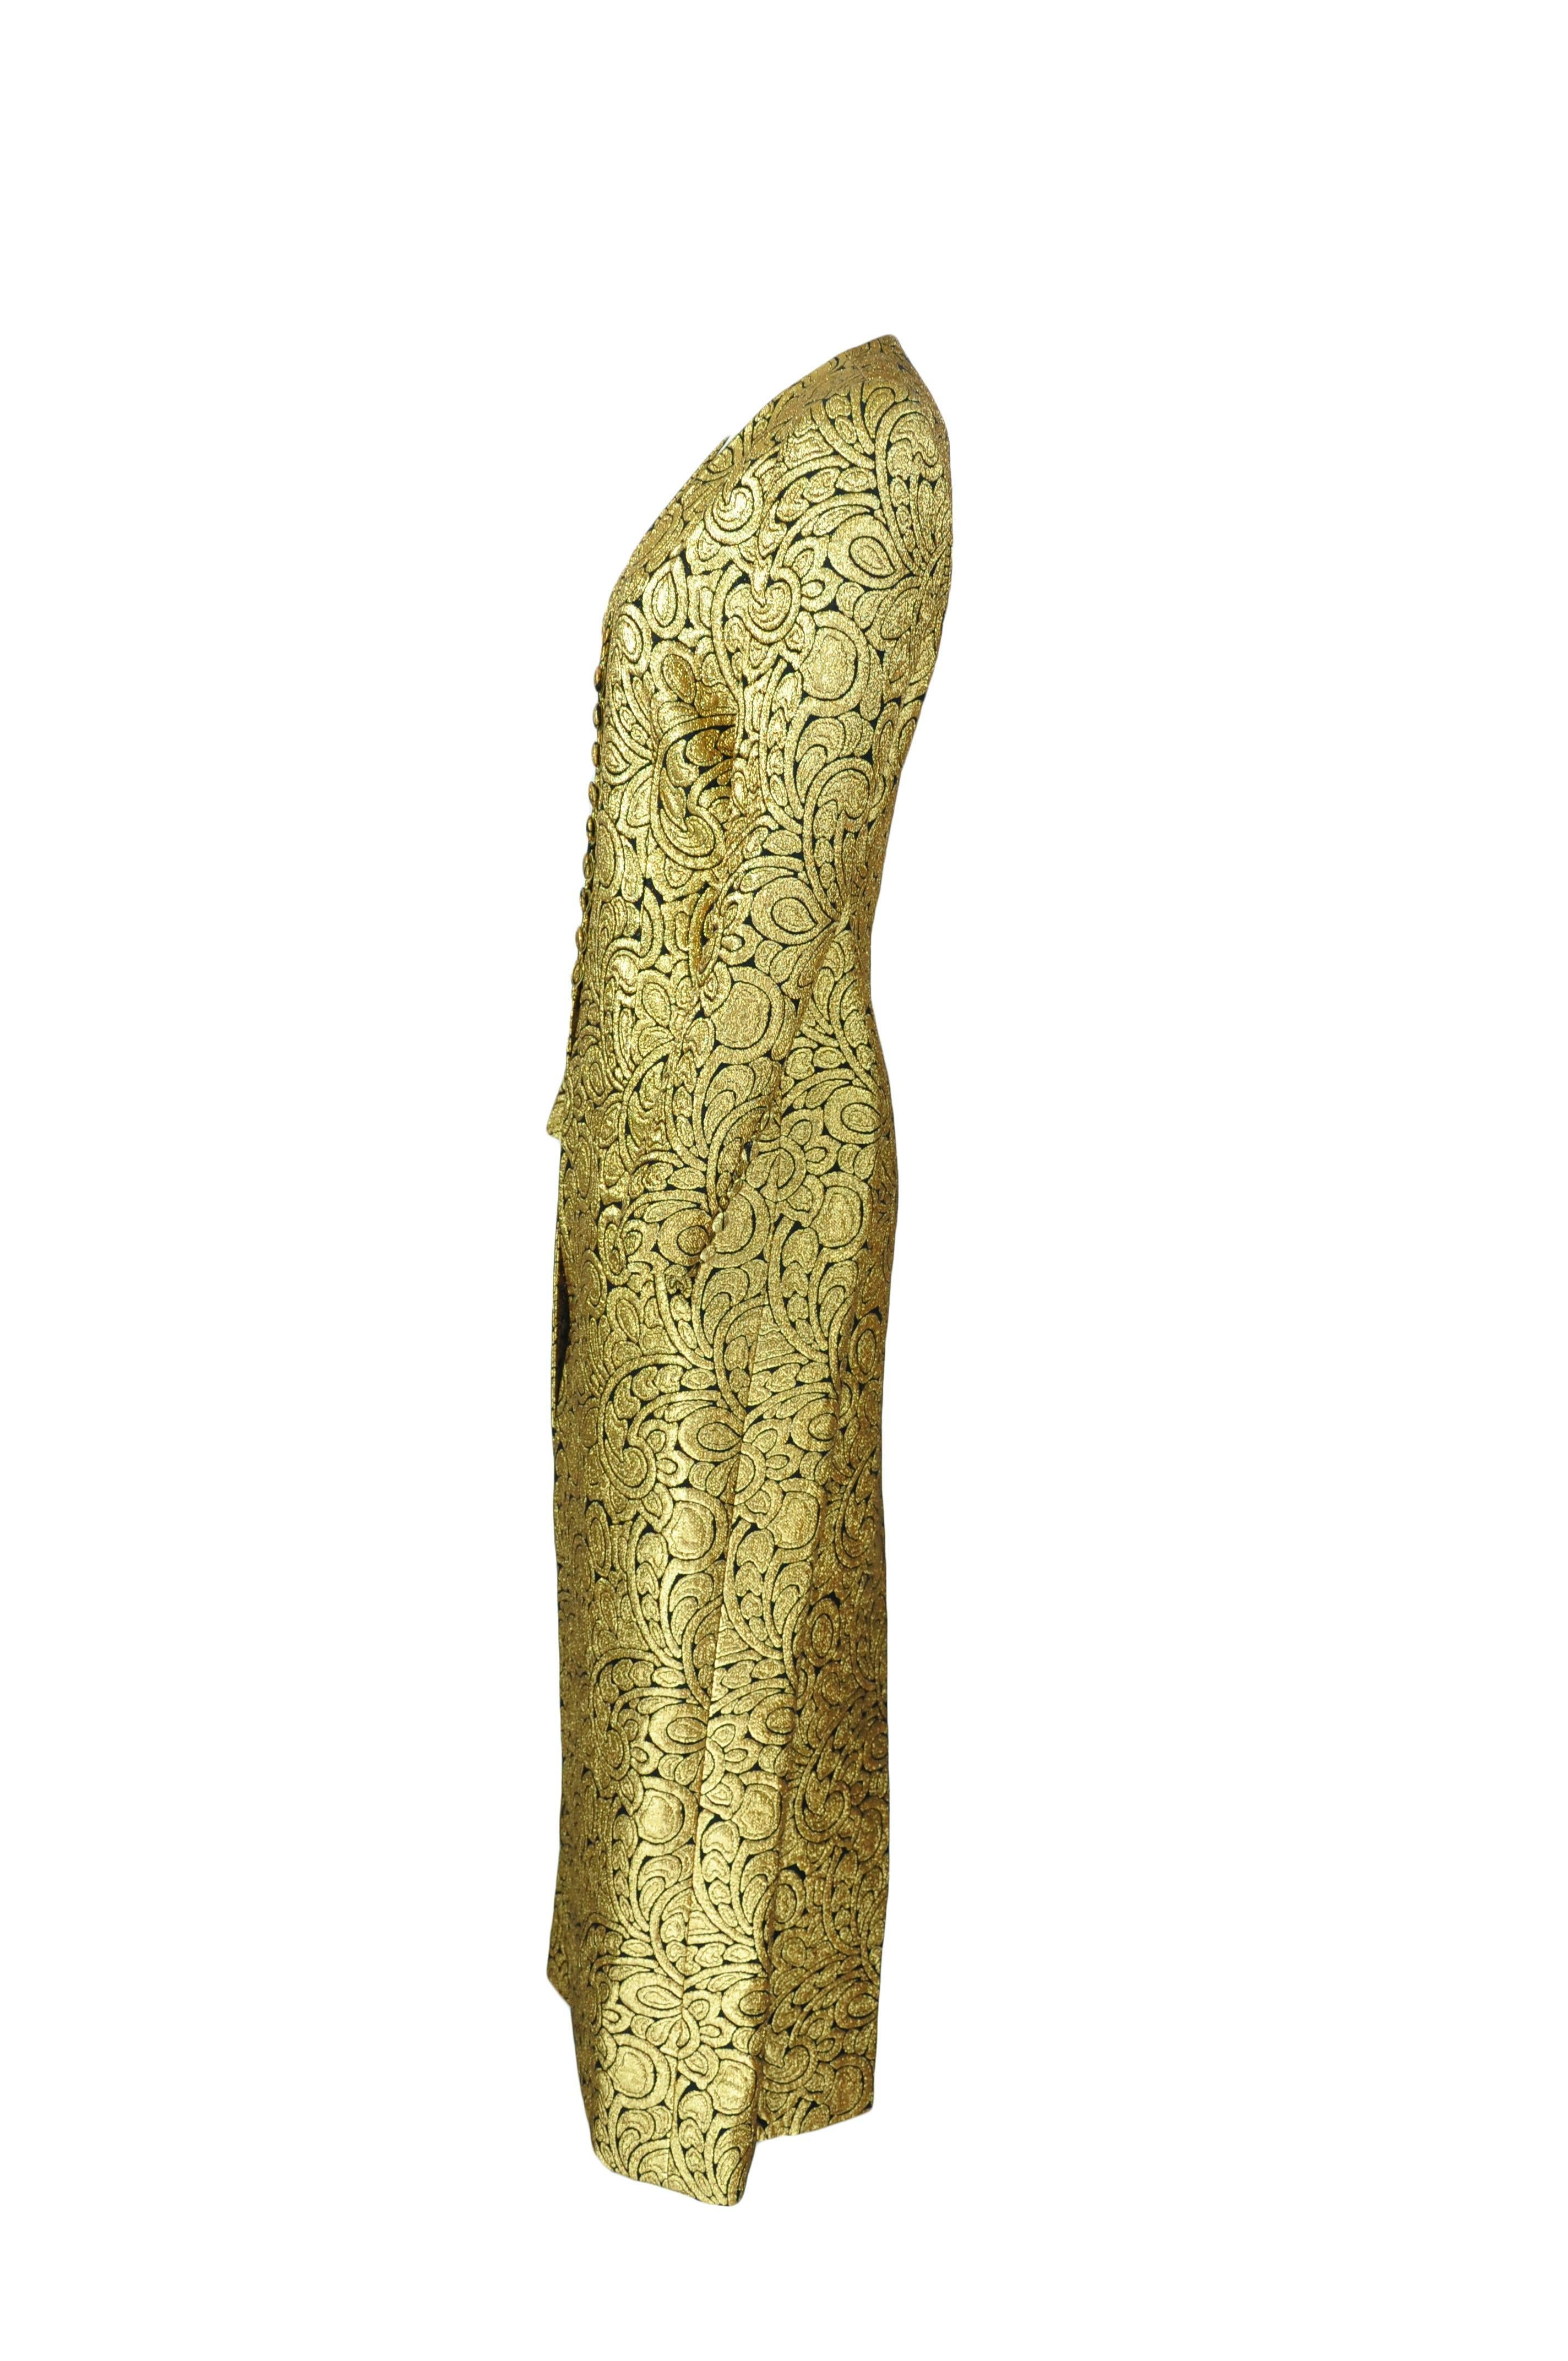 An exceptional V-neck long sleeves gold brocade maxi dress from Celine by Michael Kors. Button and loop fastening at front with a high slit at back. Fully lined. 